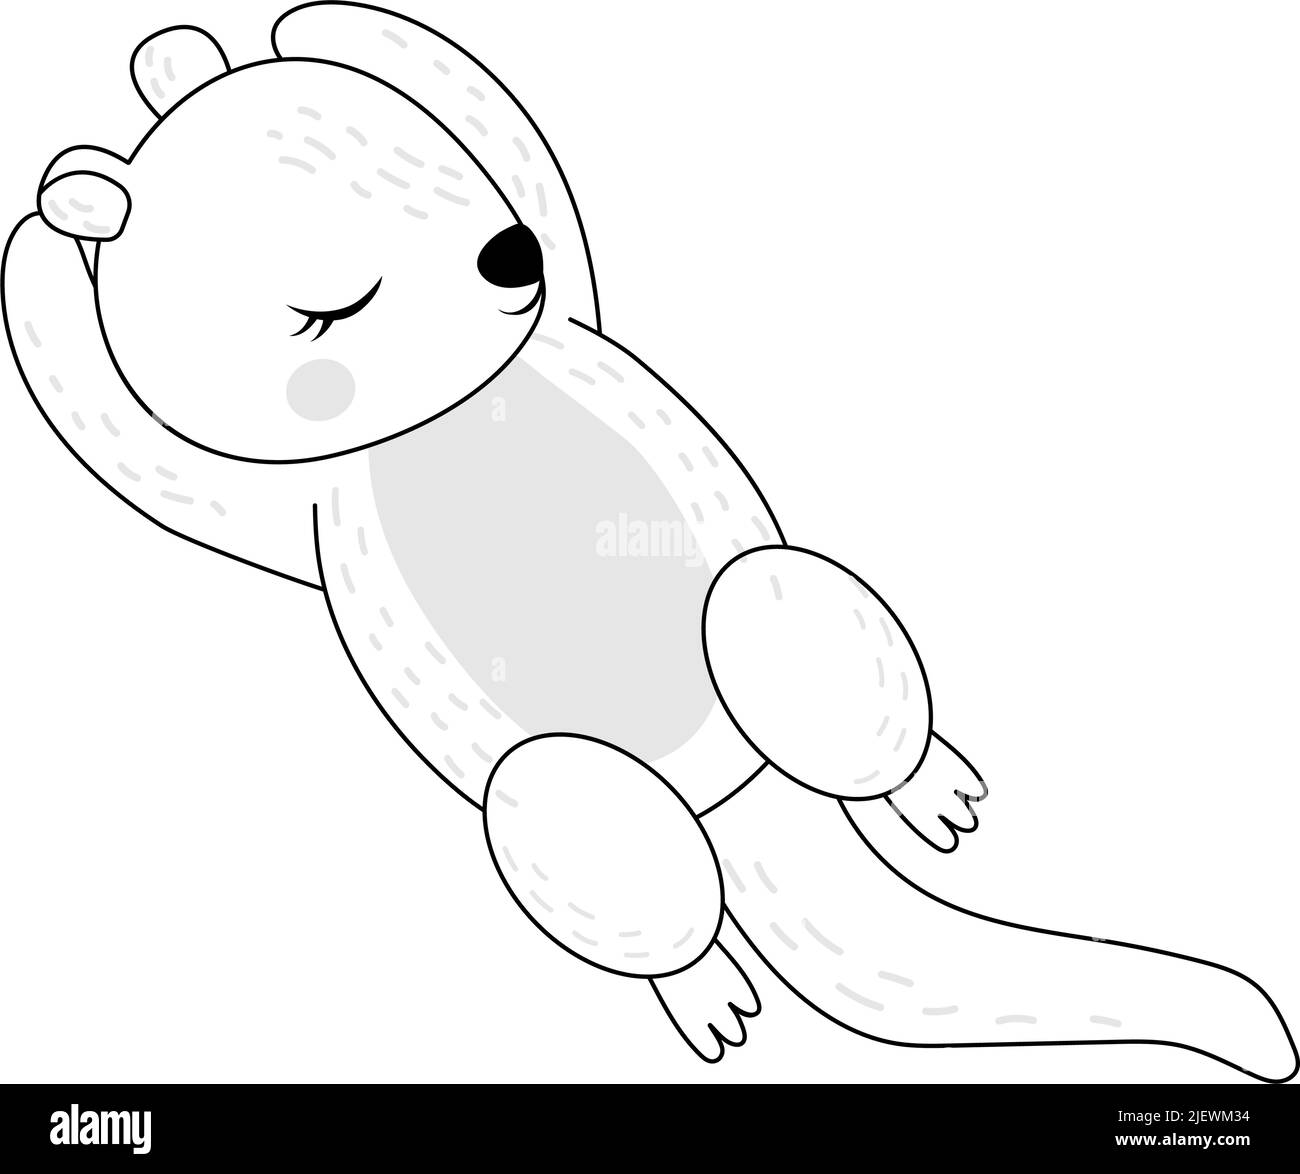 Coloring Page Otters Clipart Character Design. Adorable Clip Art Otter Sleeping on Back Black and White. Vector Illustration of an Animal for Prints Stock Vector